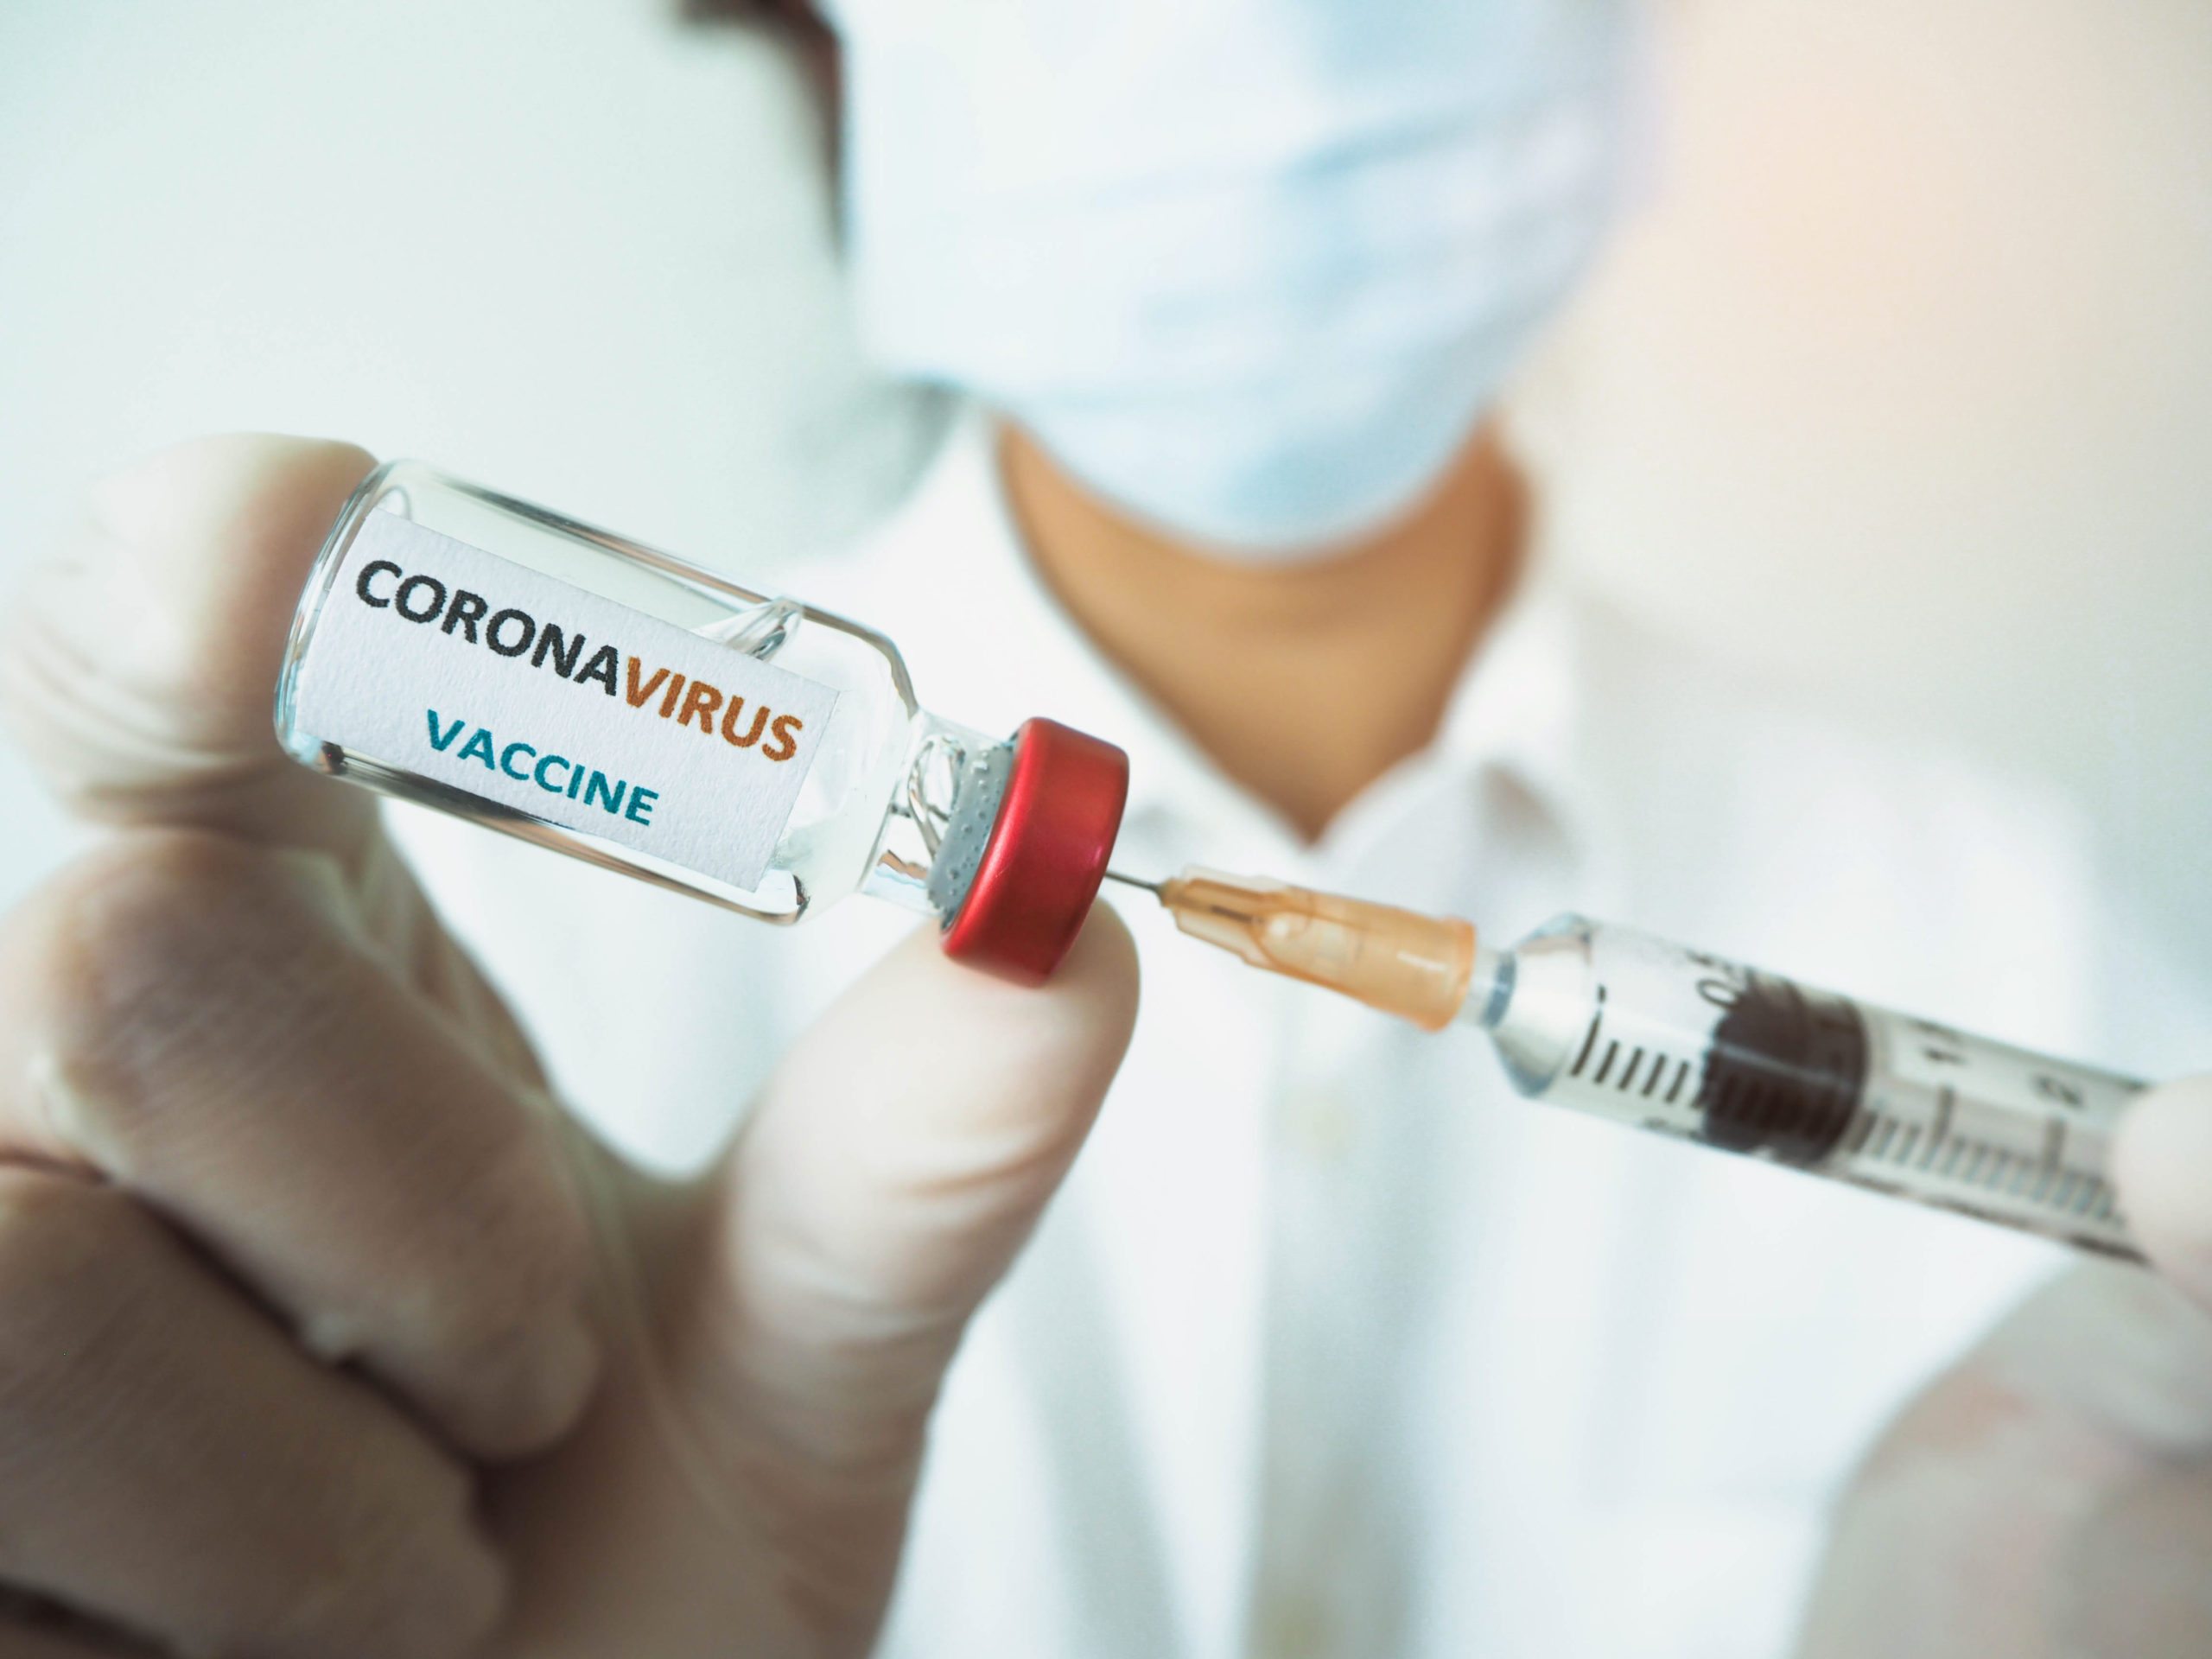 THE EEOC ISSUES COVID-19 VACCINATION GUIDANCE